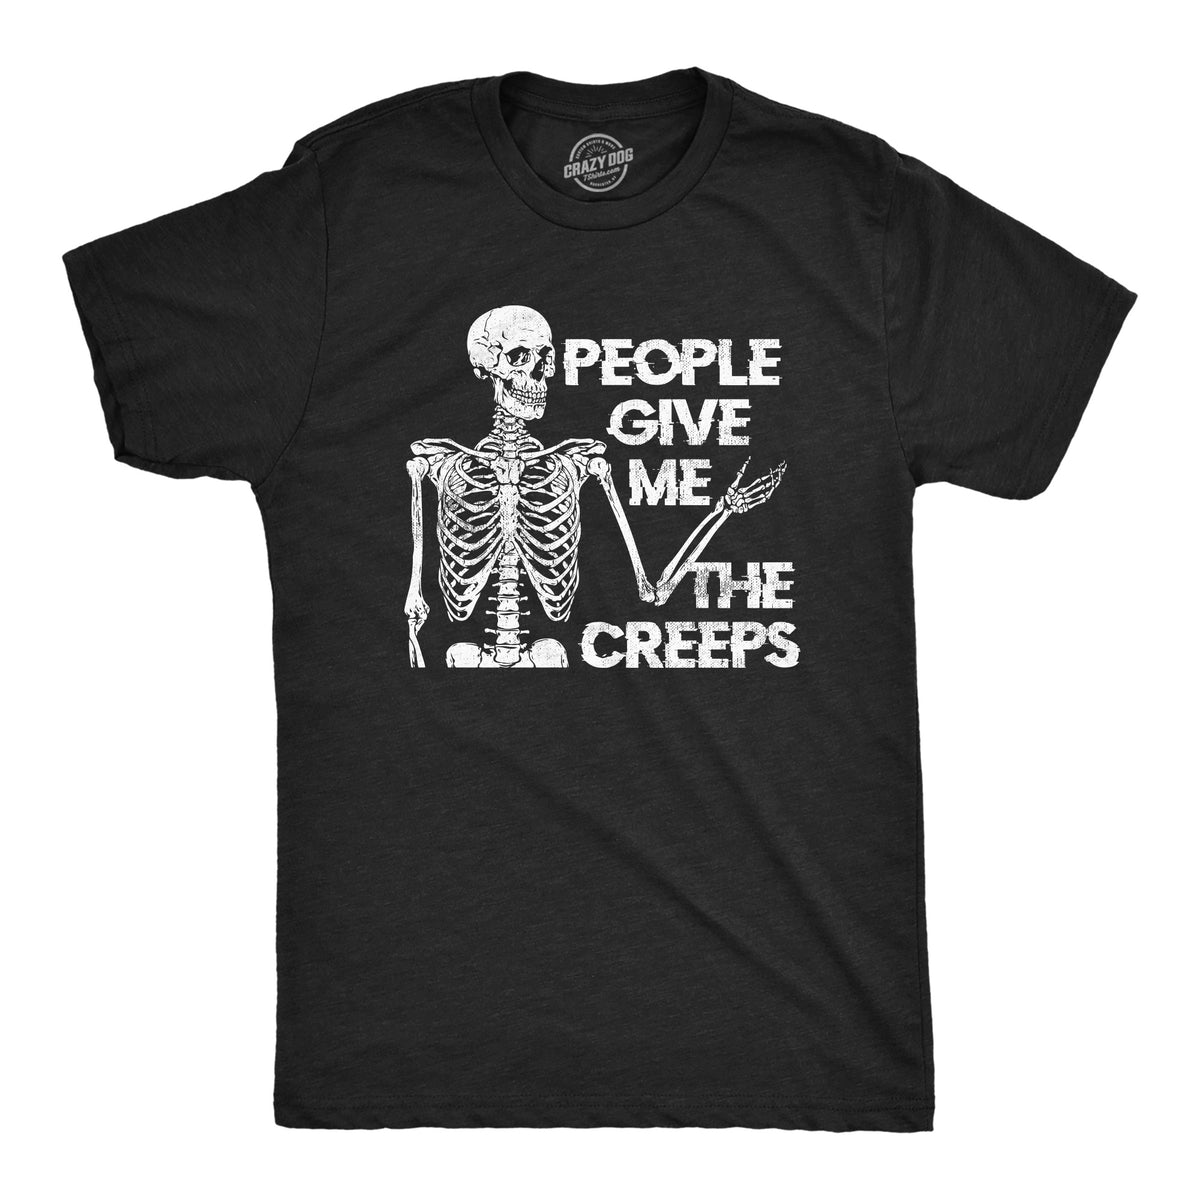 Funny Heather Black - SKELETON People Give Me The Creeps Skeleton Mens T Shirt Nerdy Halloween Introvert sarcastic Tee